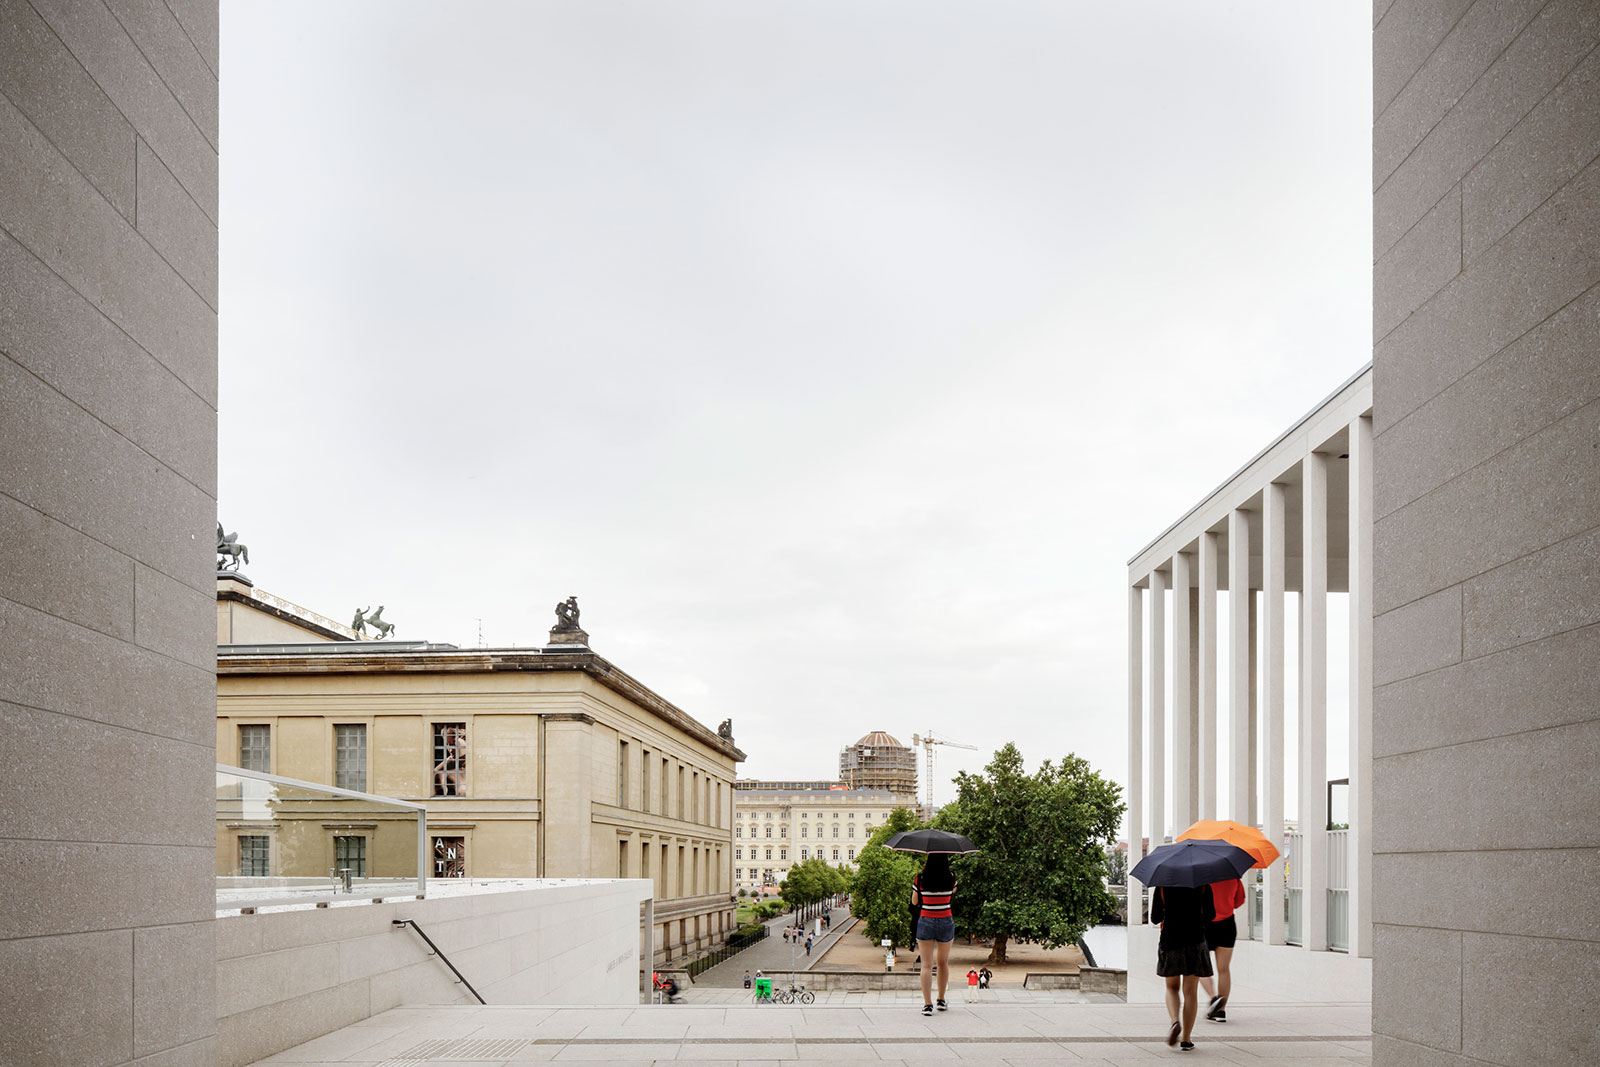 James Simon Galerie Germany David Chipperfield Architects Berlin photograph by Ute Zscharnt